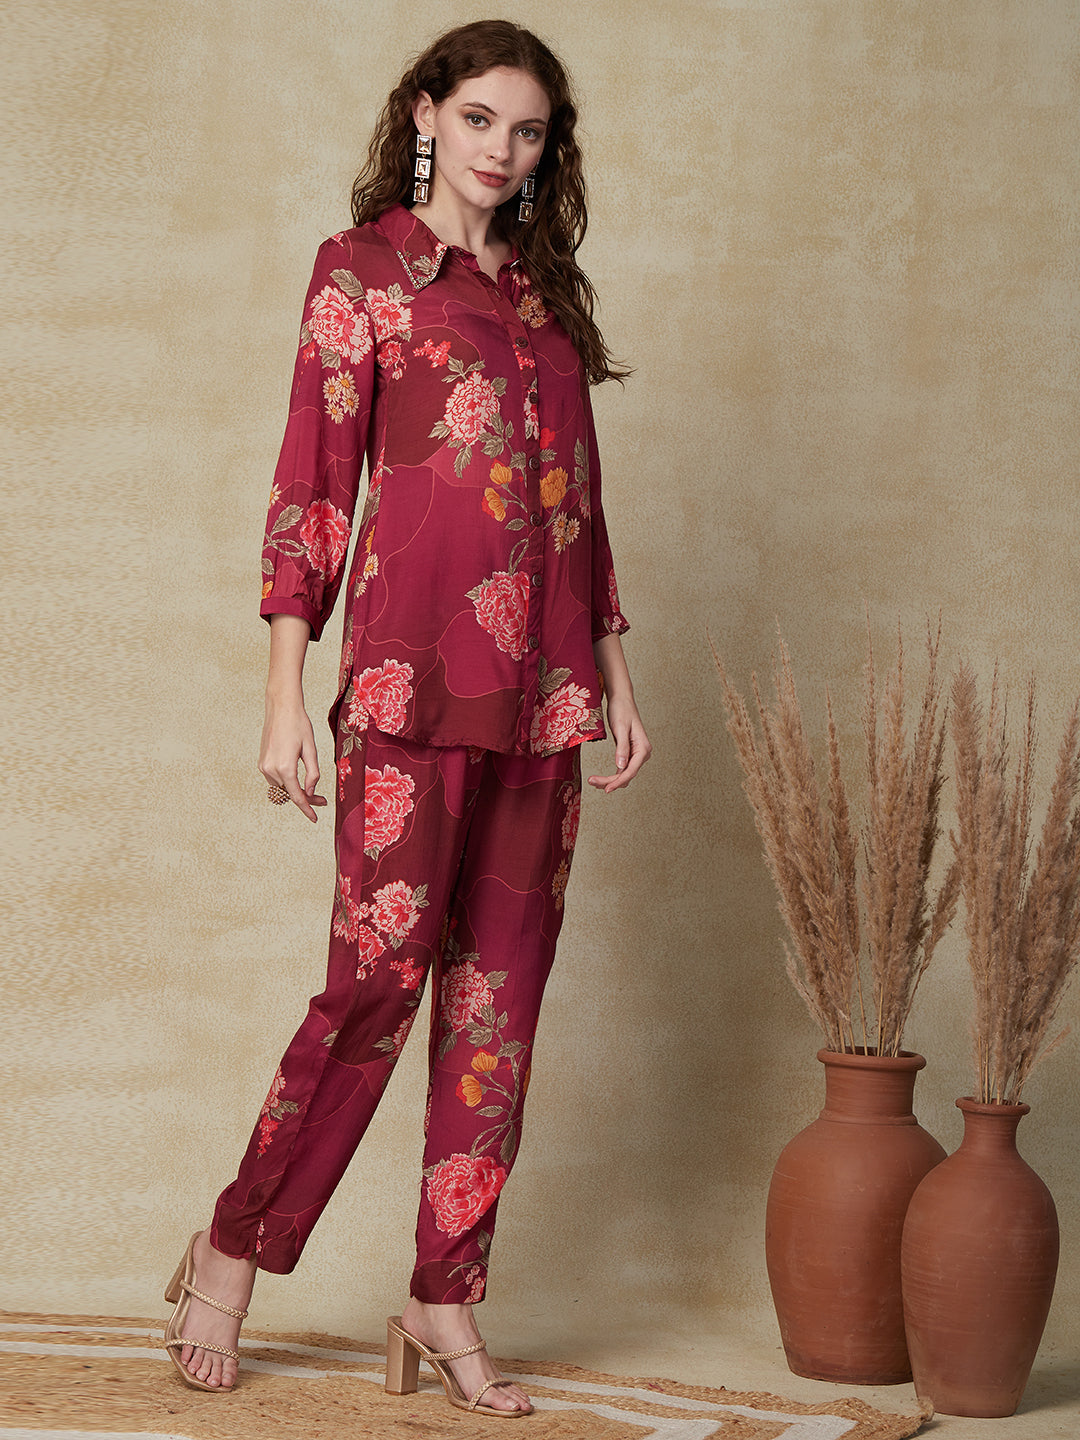 Floral Printed Stone, Pearl & Cutdana Embroidered Shirt with Pants Cord Set - Burgundy